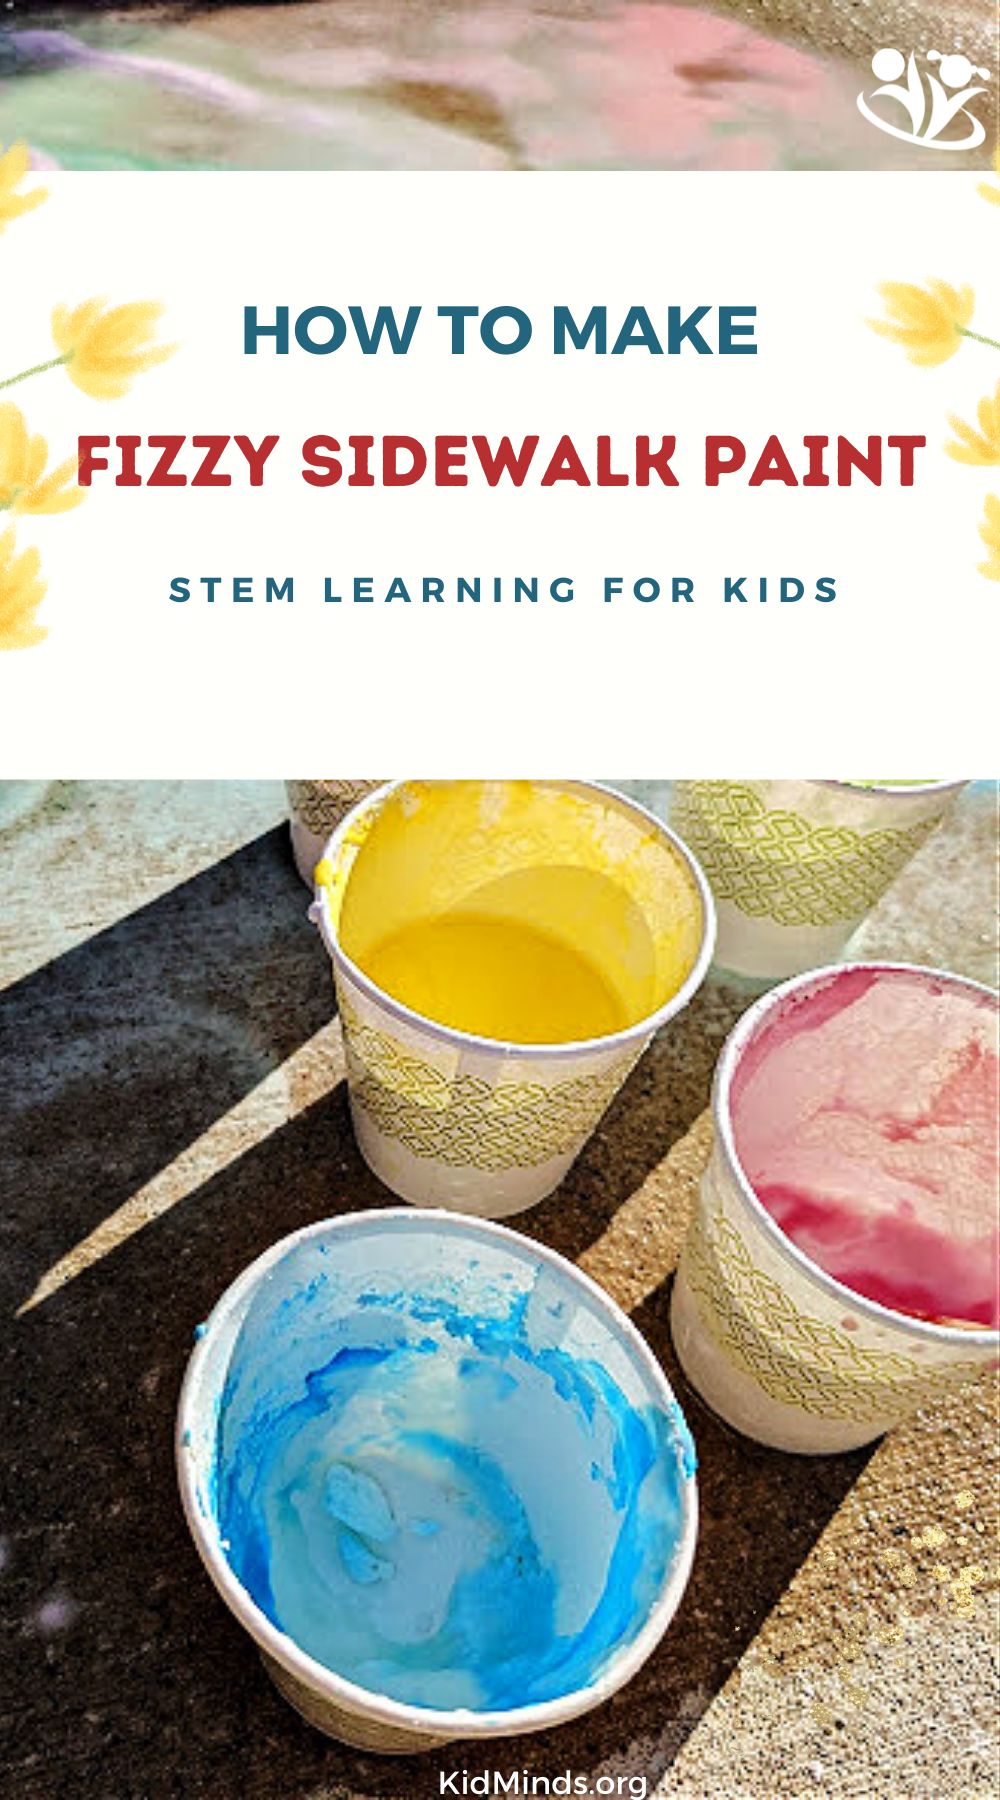 Ready in just five minutes, this fizzy sidewalk paint recipe is a super fun way to spend time outside and learn some science. #kidsactivities #summer #kidminds #learningideas #STEAM